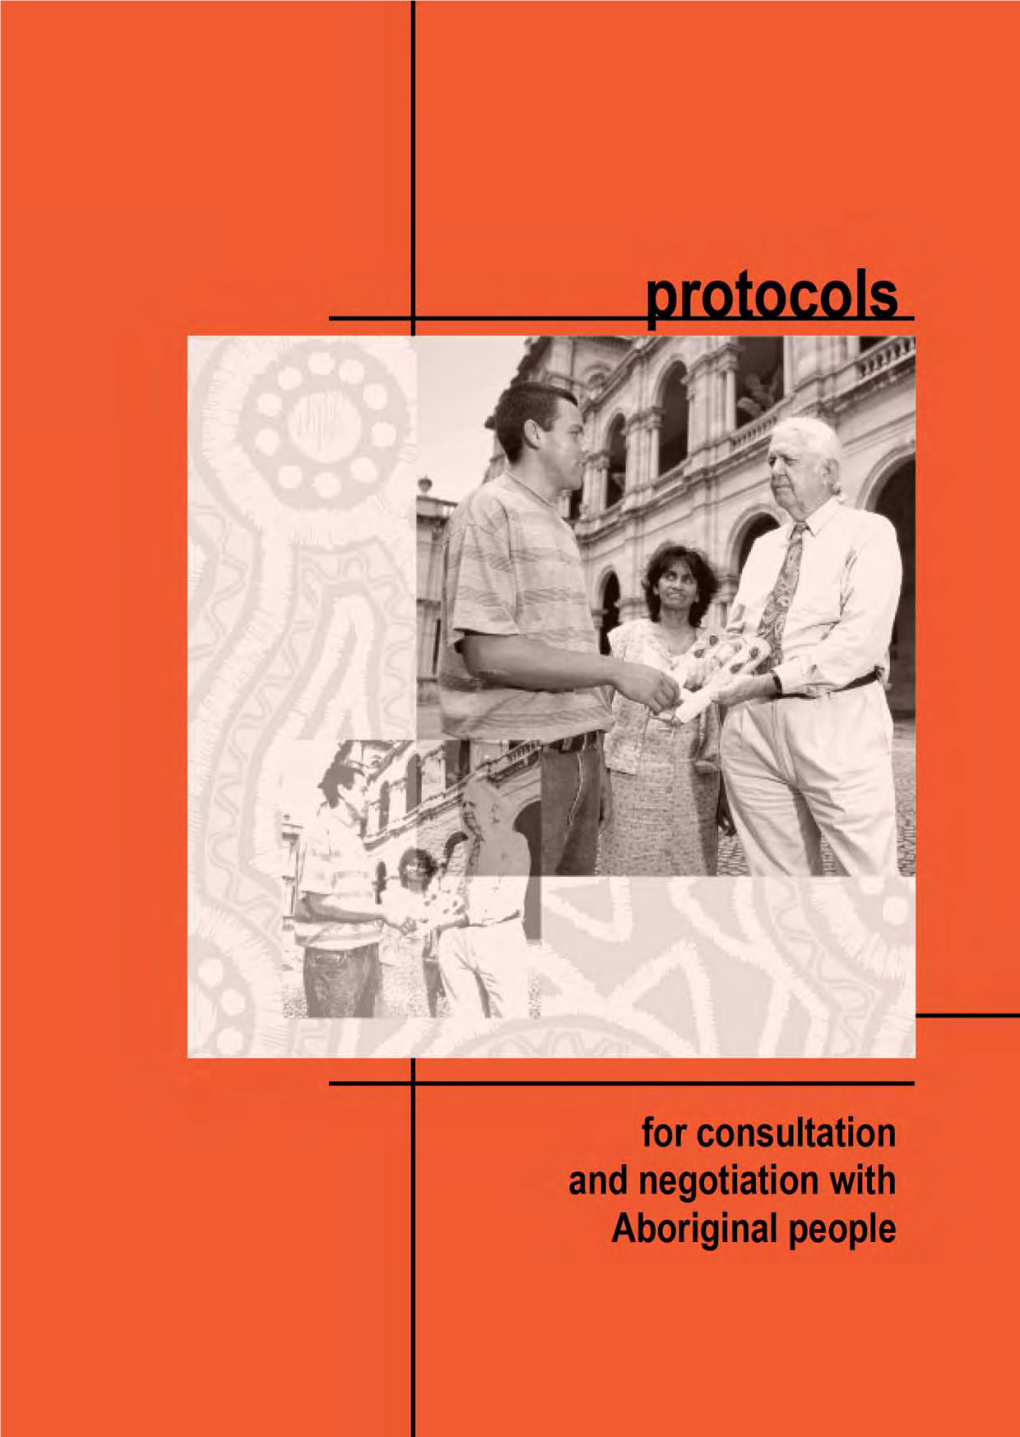 Protocols for Consultation and Negotiation with Aboriginal People Introduction